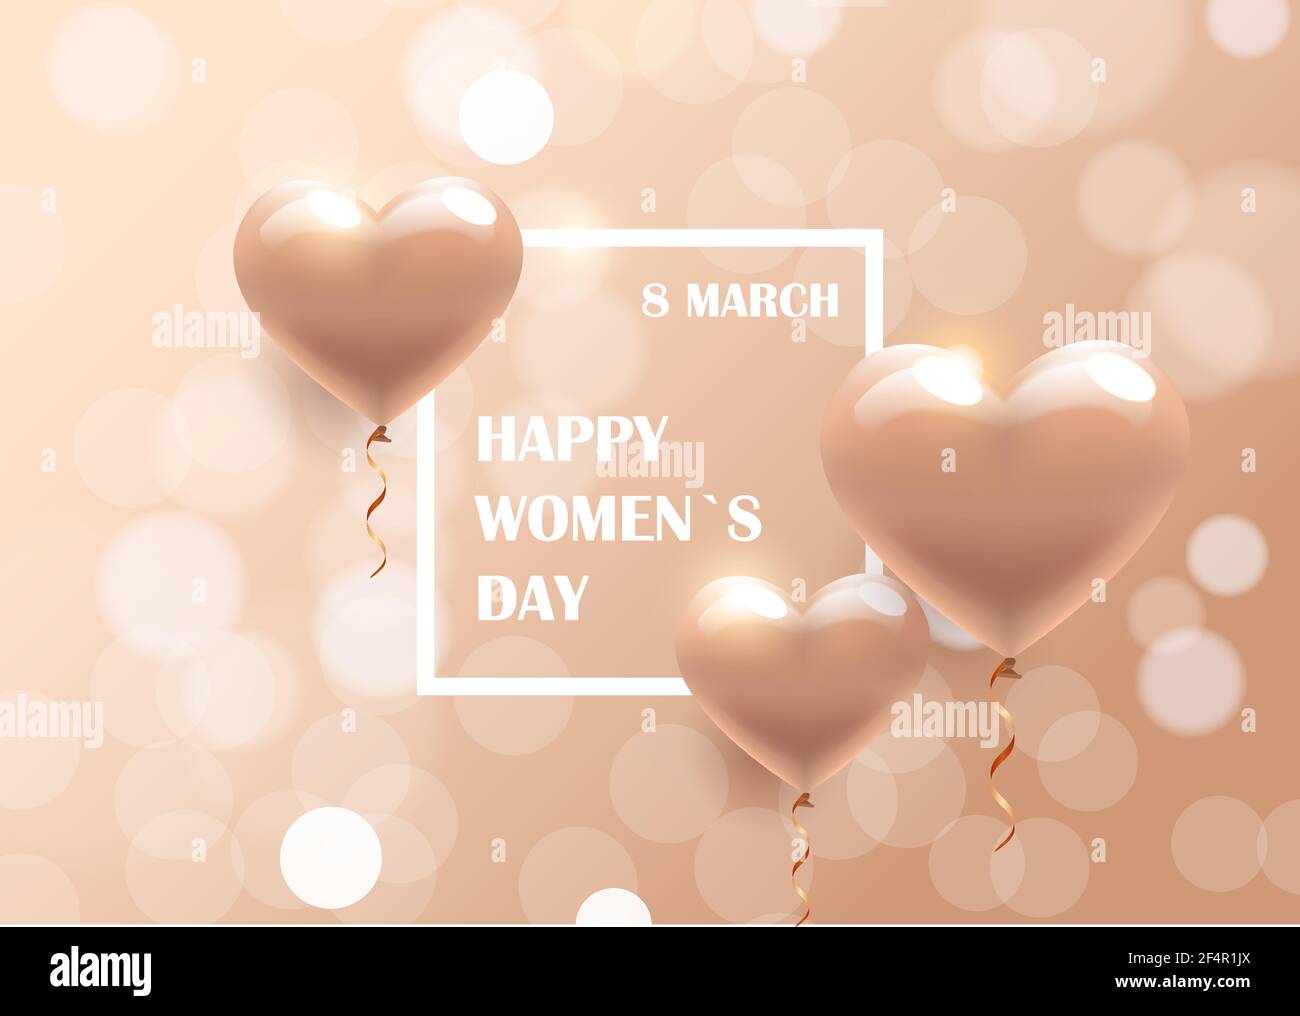 womens day 8 march holiday celebration banner flyer or greeting card with air balloons horizontal Stock Vector